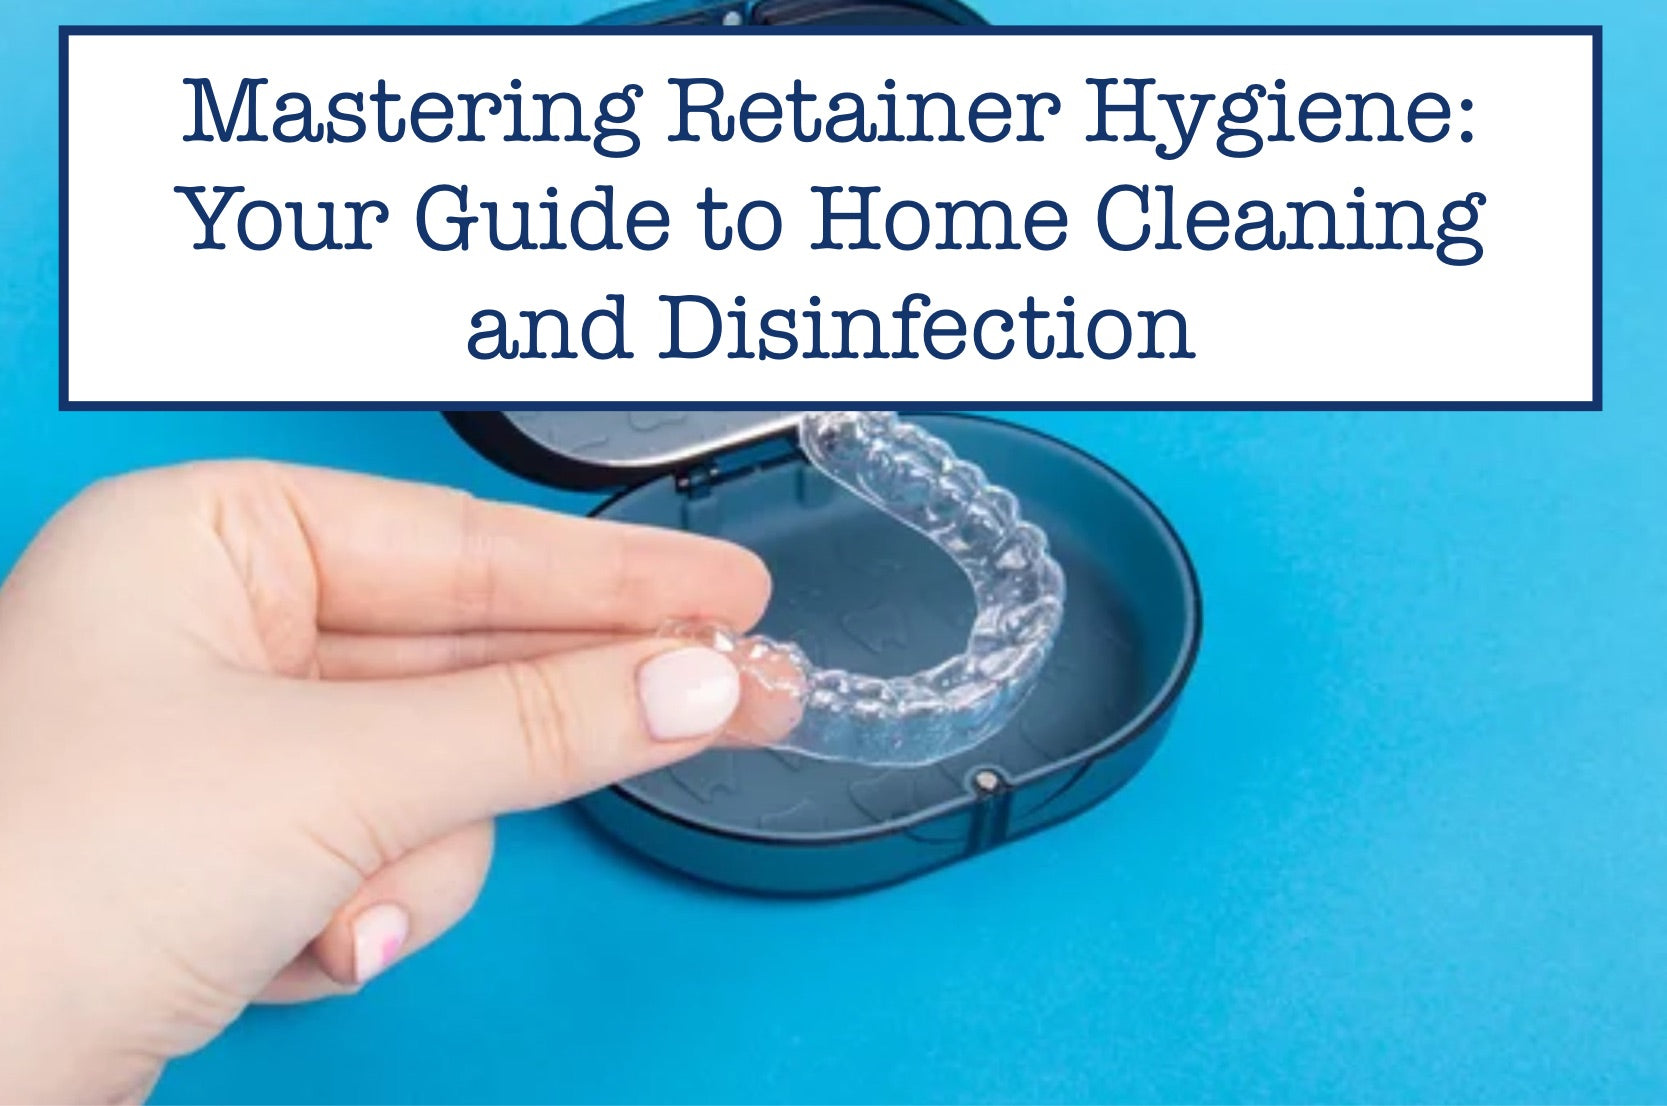 Mastering Retainer Hygiene: Your Guide to Home Cleaning and Disinfection